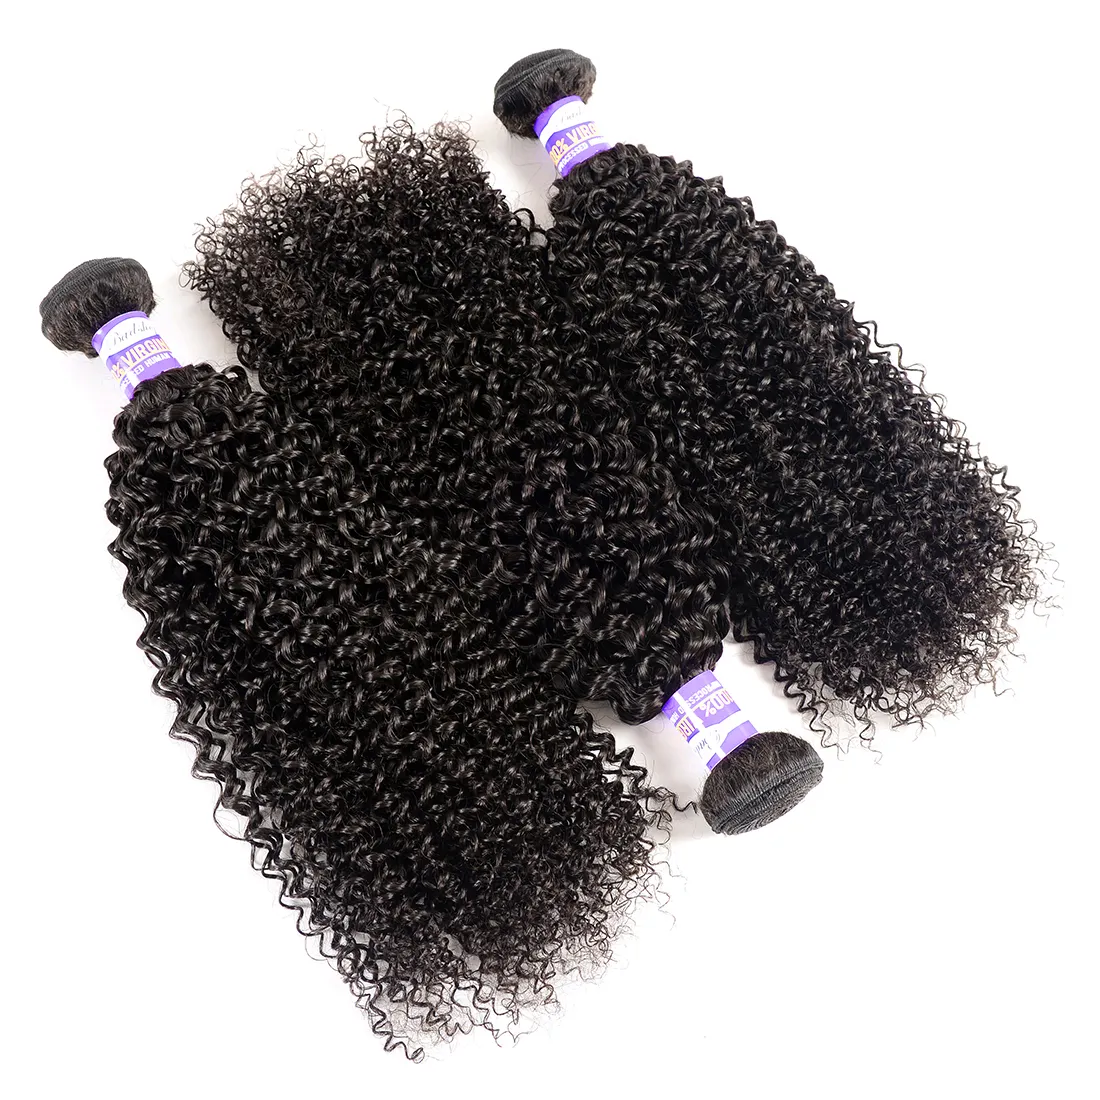 9A Mongolian Kinky Curly Virgin Hair 3 4 Bundles Remy Hair Kinky Curly Weaves Unprocessed Human Hair Weave Natural Color 1028 inc4653849